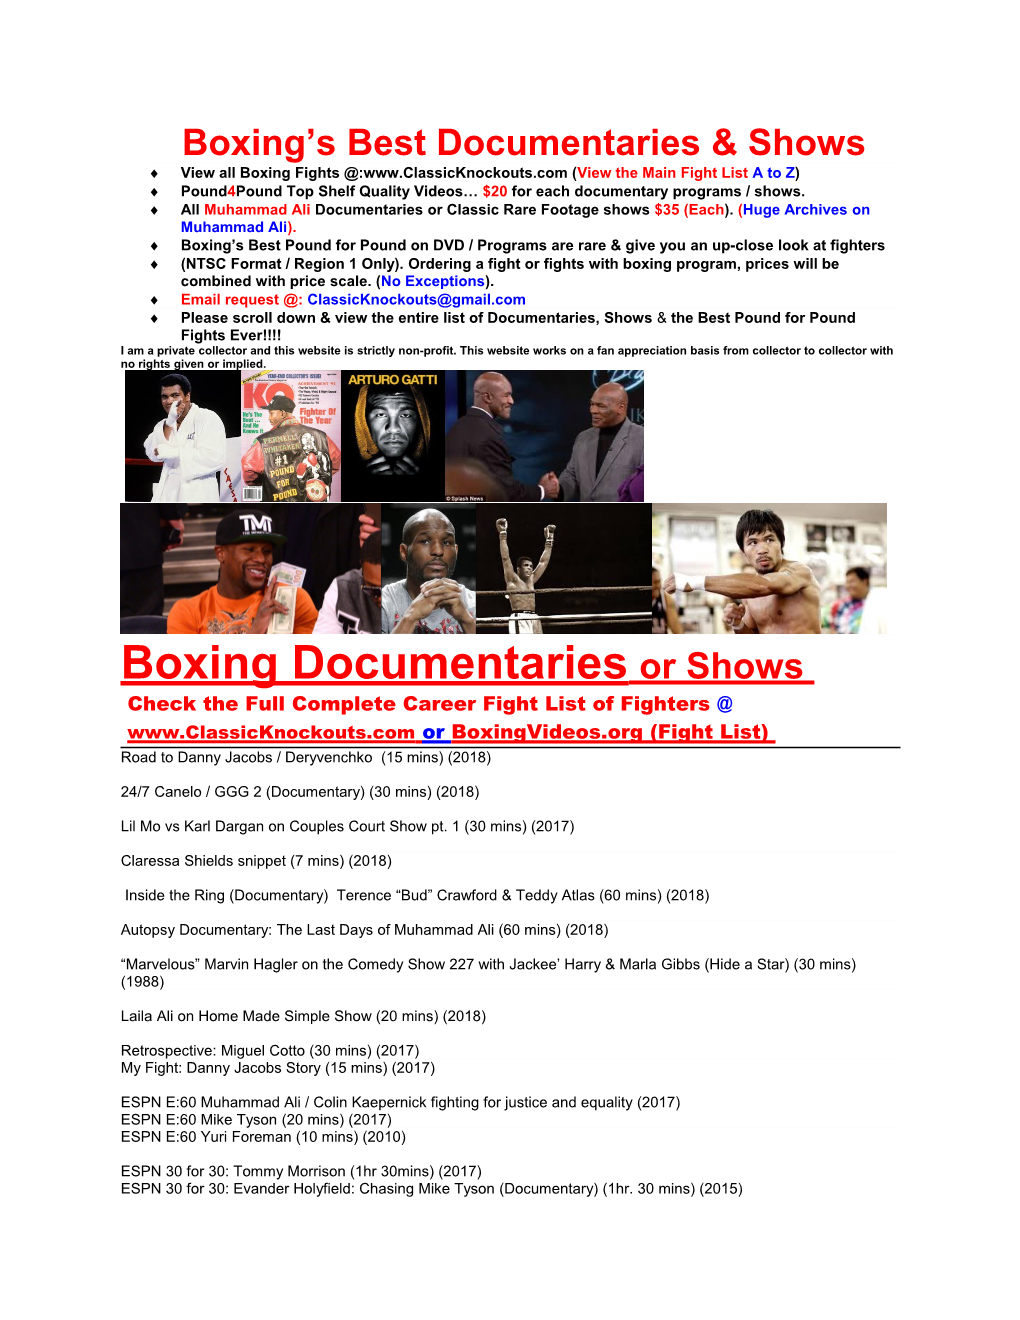 View All Boxing Fights : (View the Main Fight List a to Z)